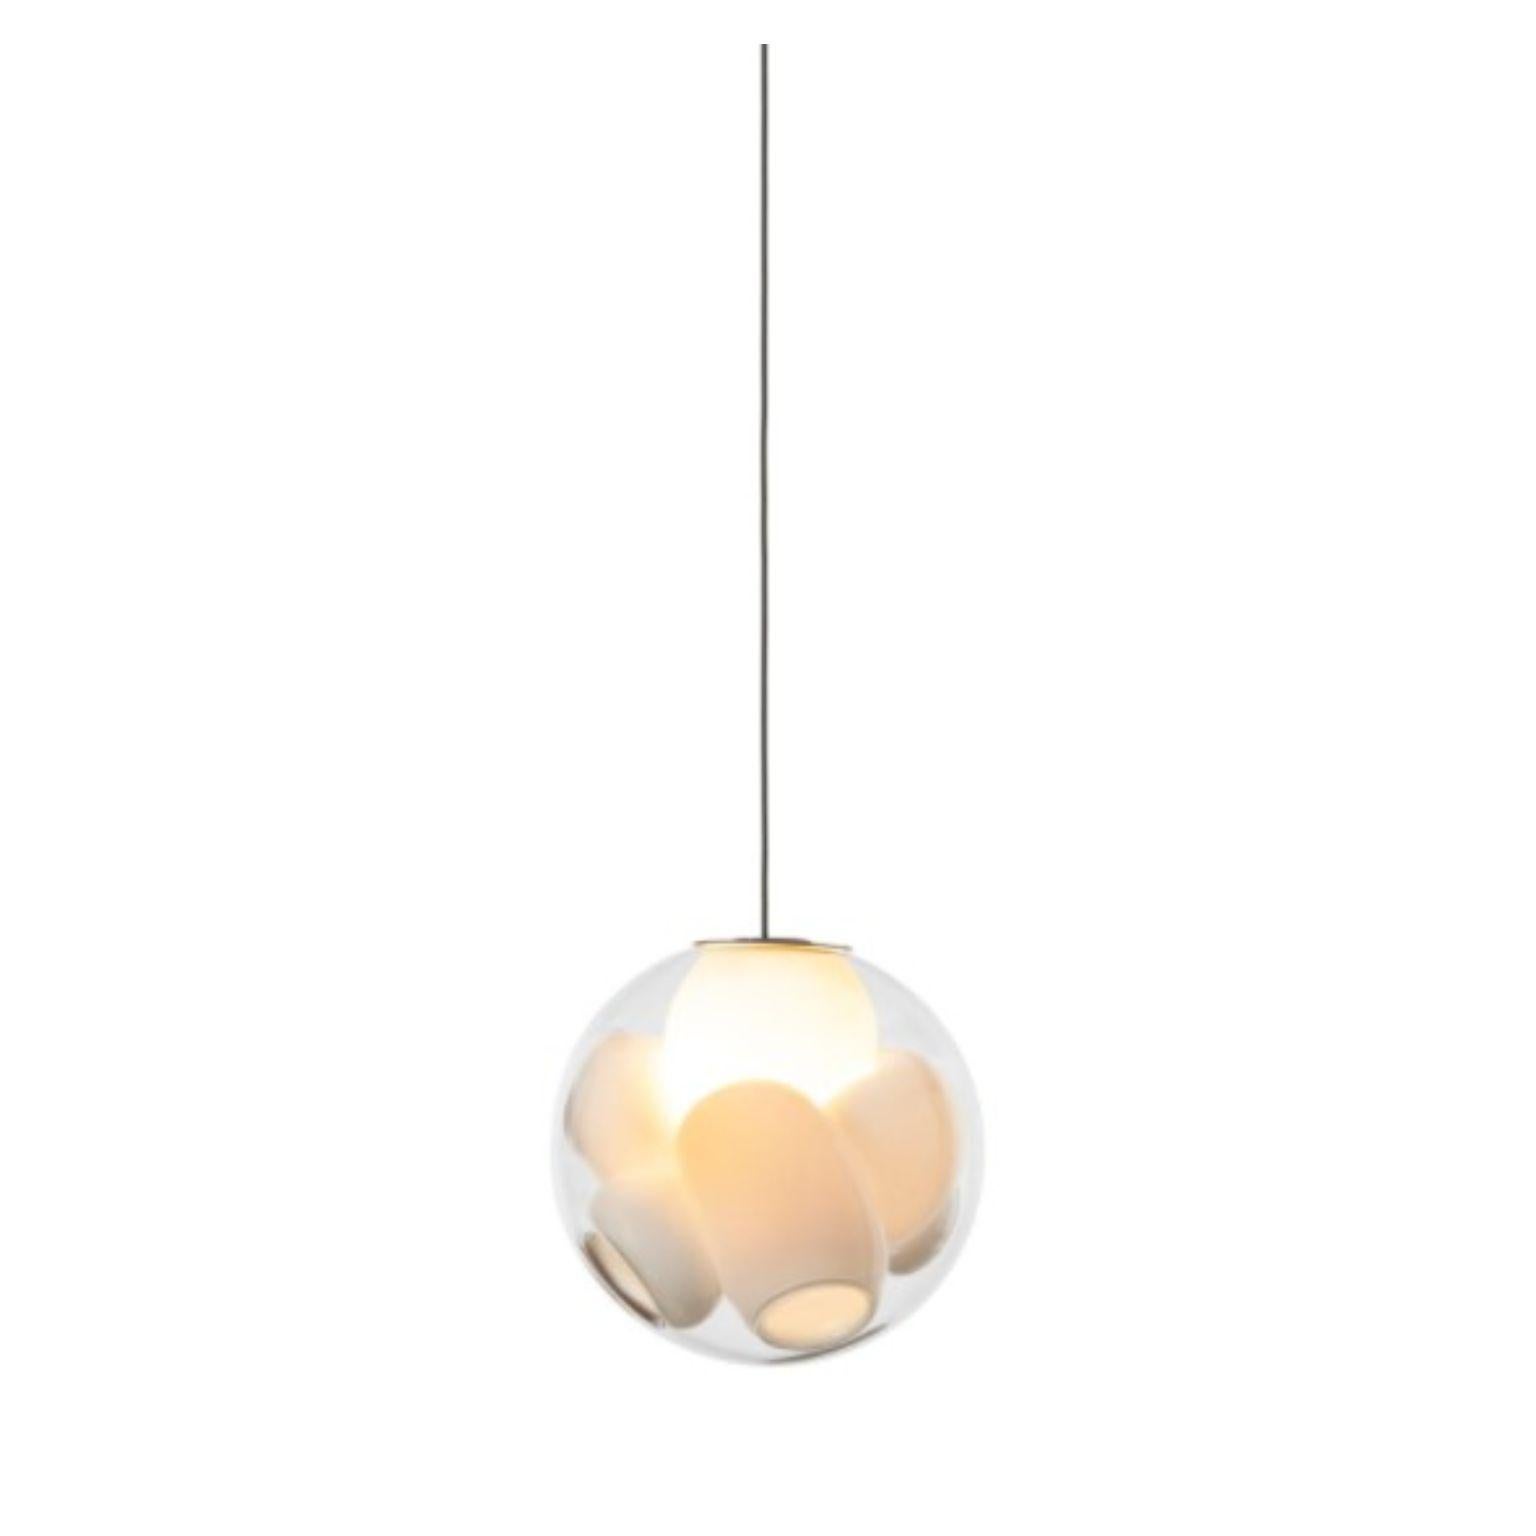 38.1 pendant by Bocci
Dimensions: D 11.6 x H 300 cm
Materials: brushed nickel round canopy
Weight: 2.7 kg
Also available in different dimensions and models.
All our lamps can be wired according to each country. If sold to the USA it will be